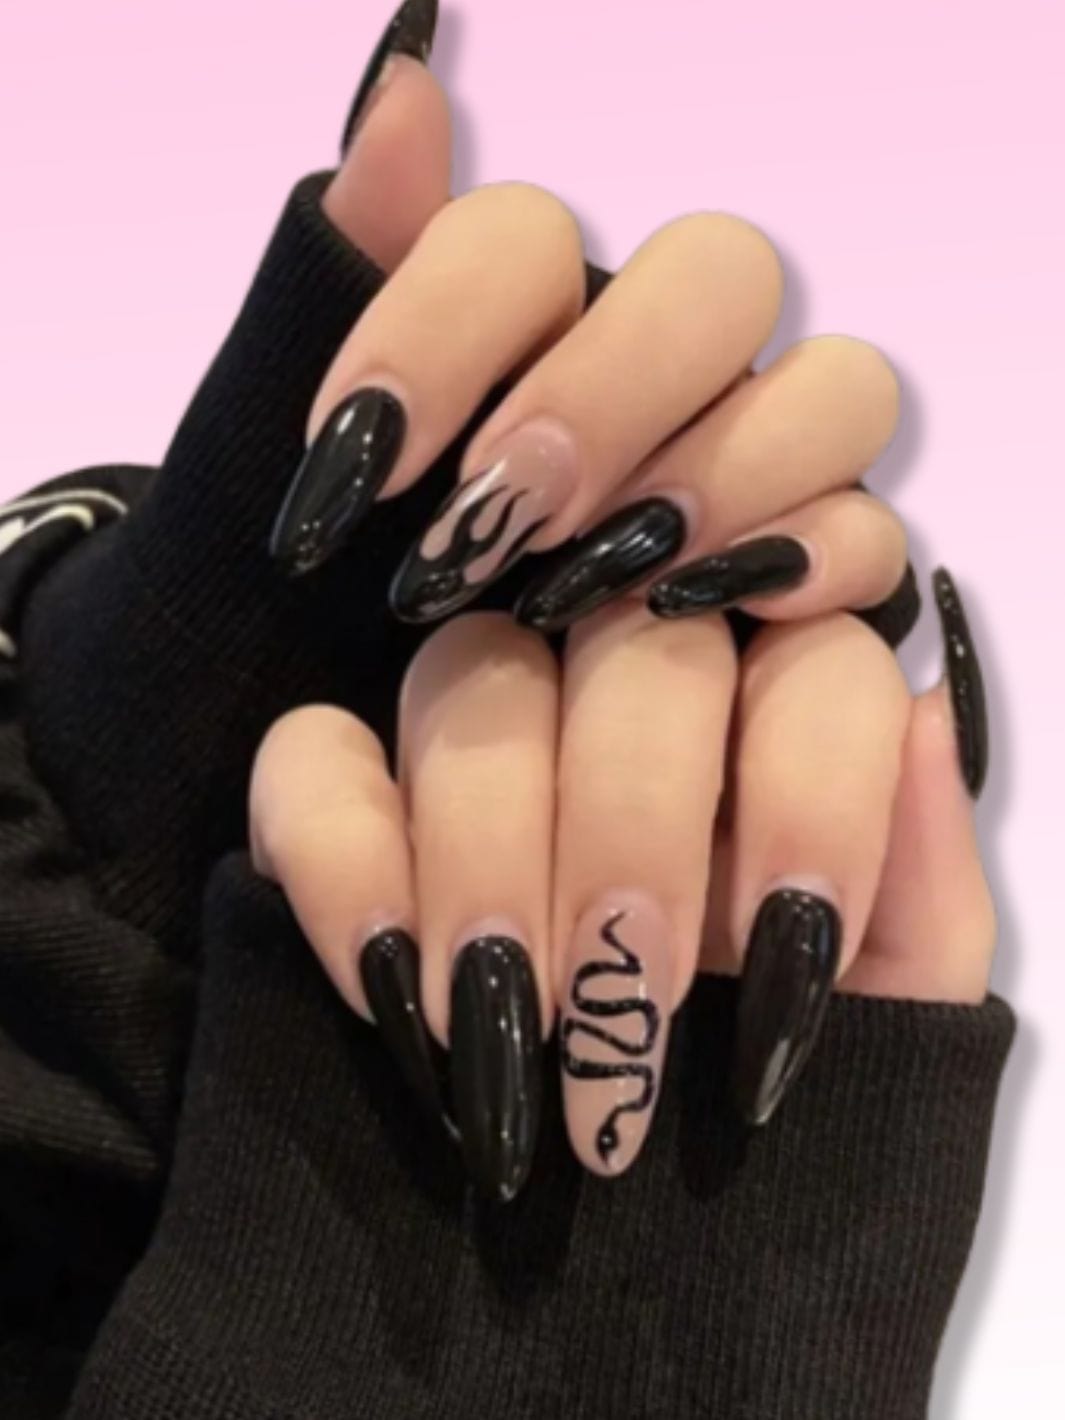 Faux ongles noirs Nail Chic